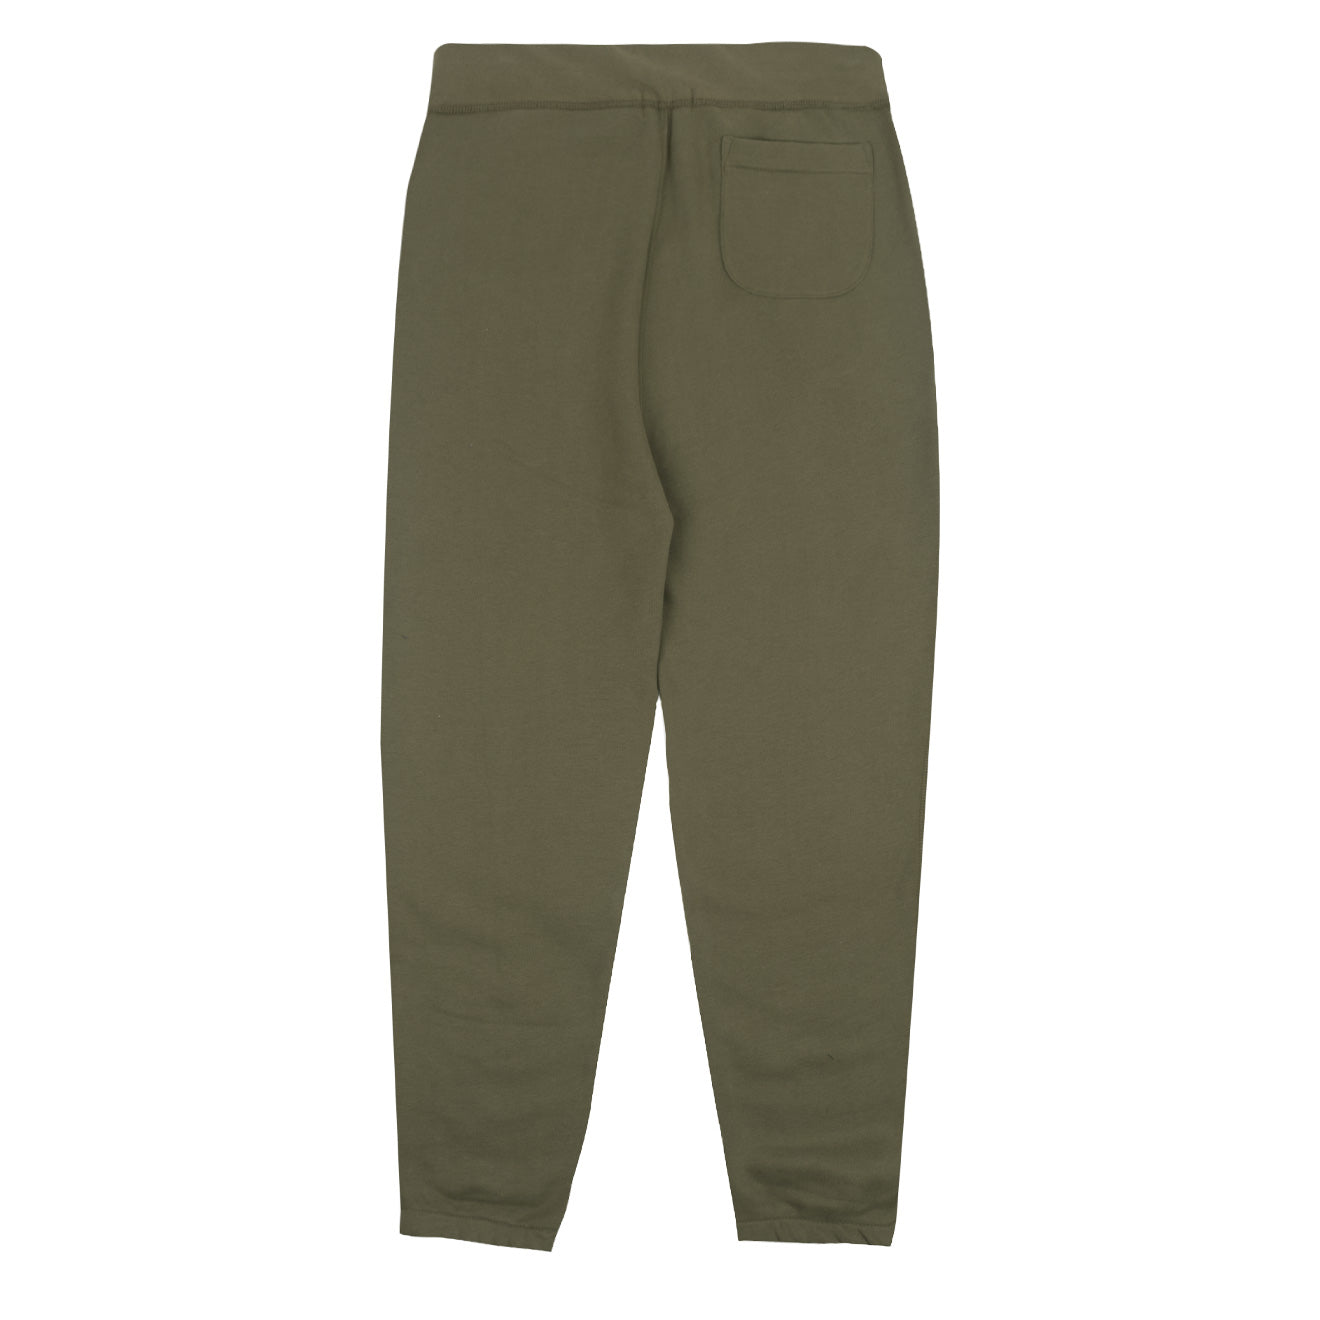 Polo Ralph Lauren Fleece Athletic Pant Defender Green | The Sporting Lodge